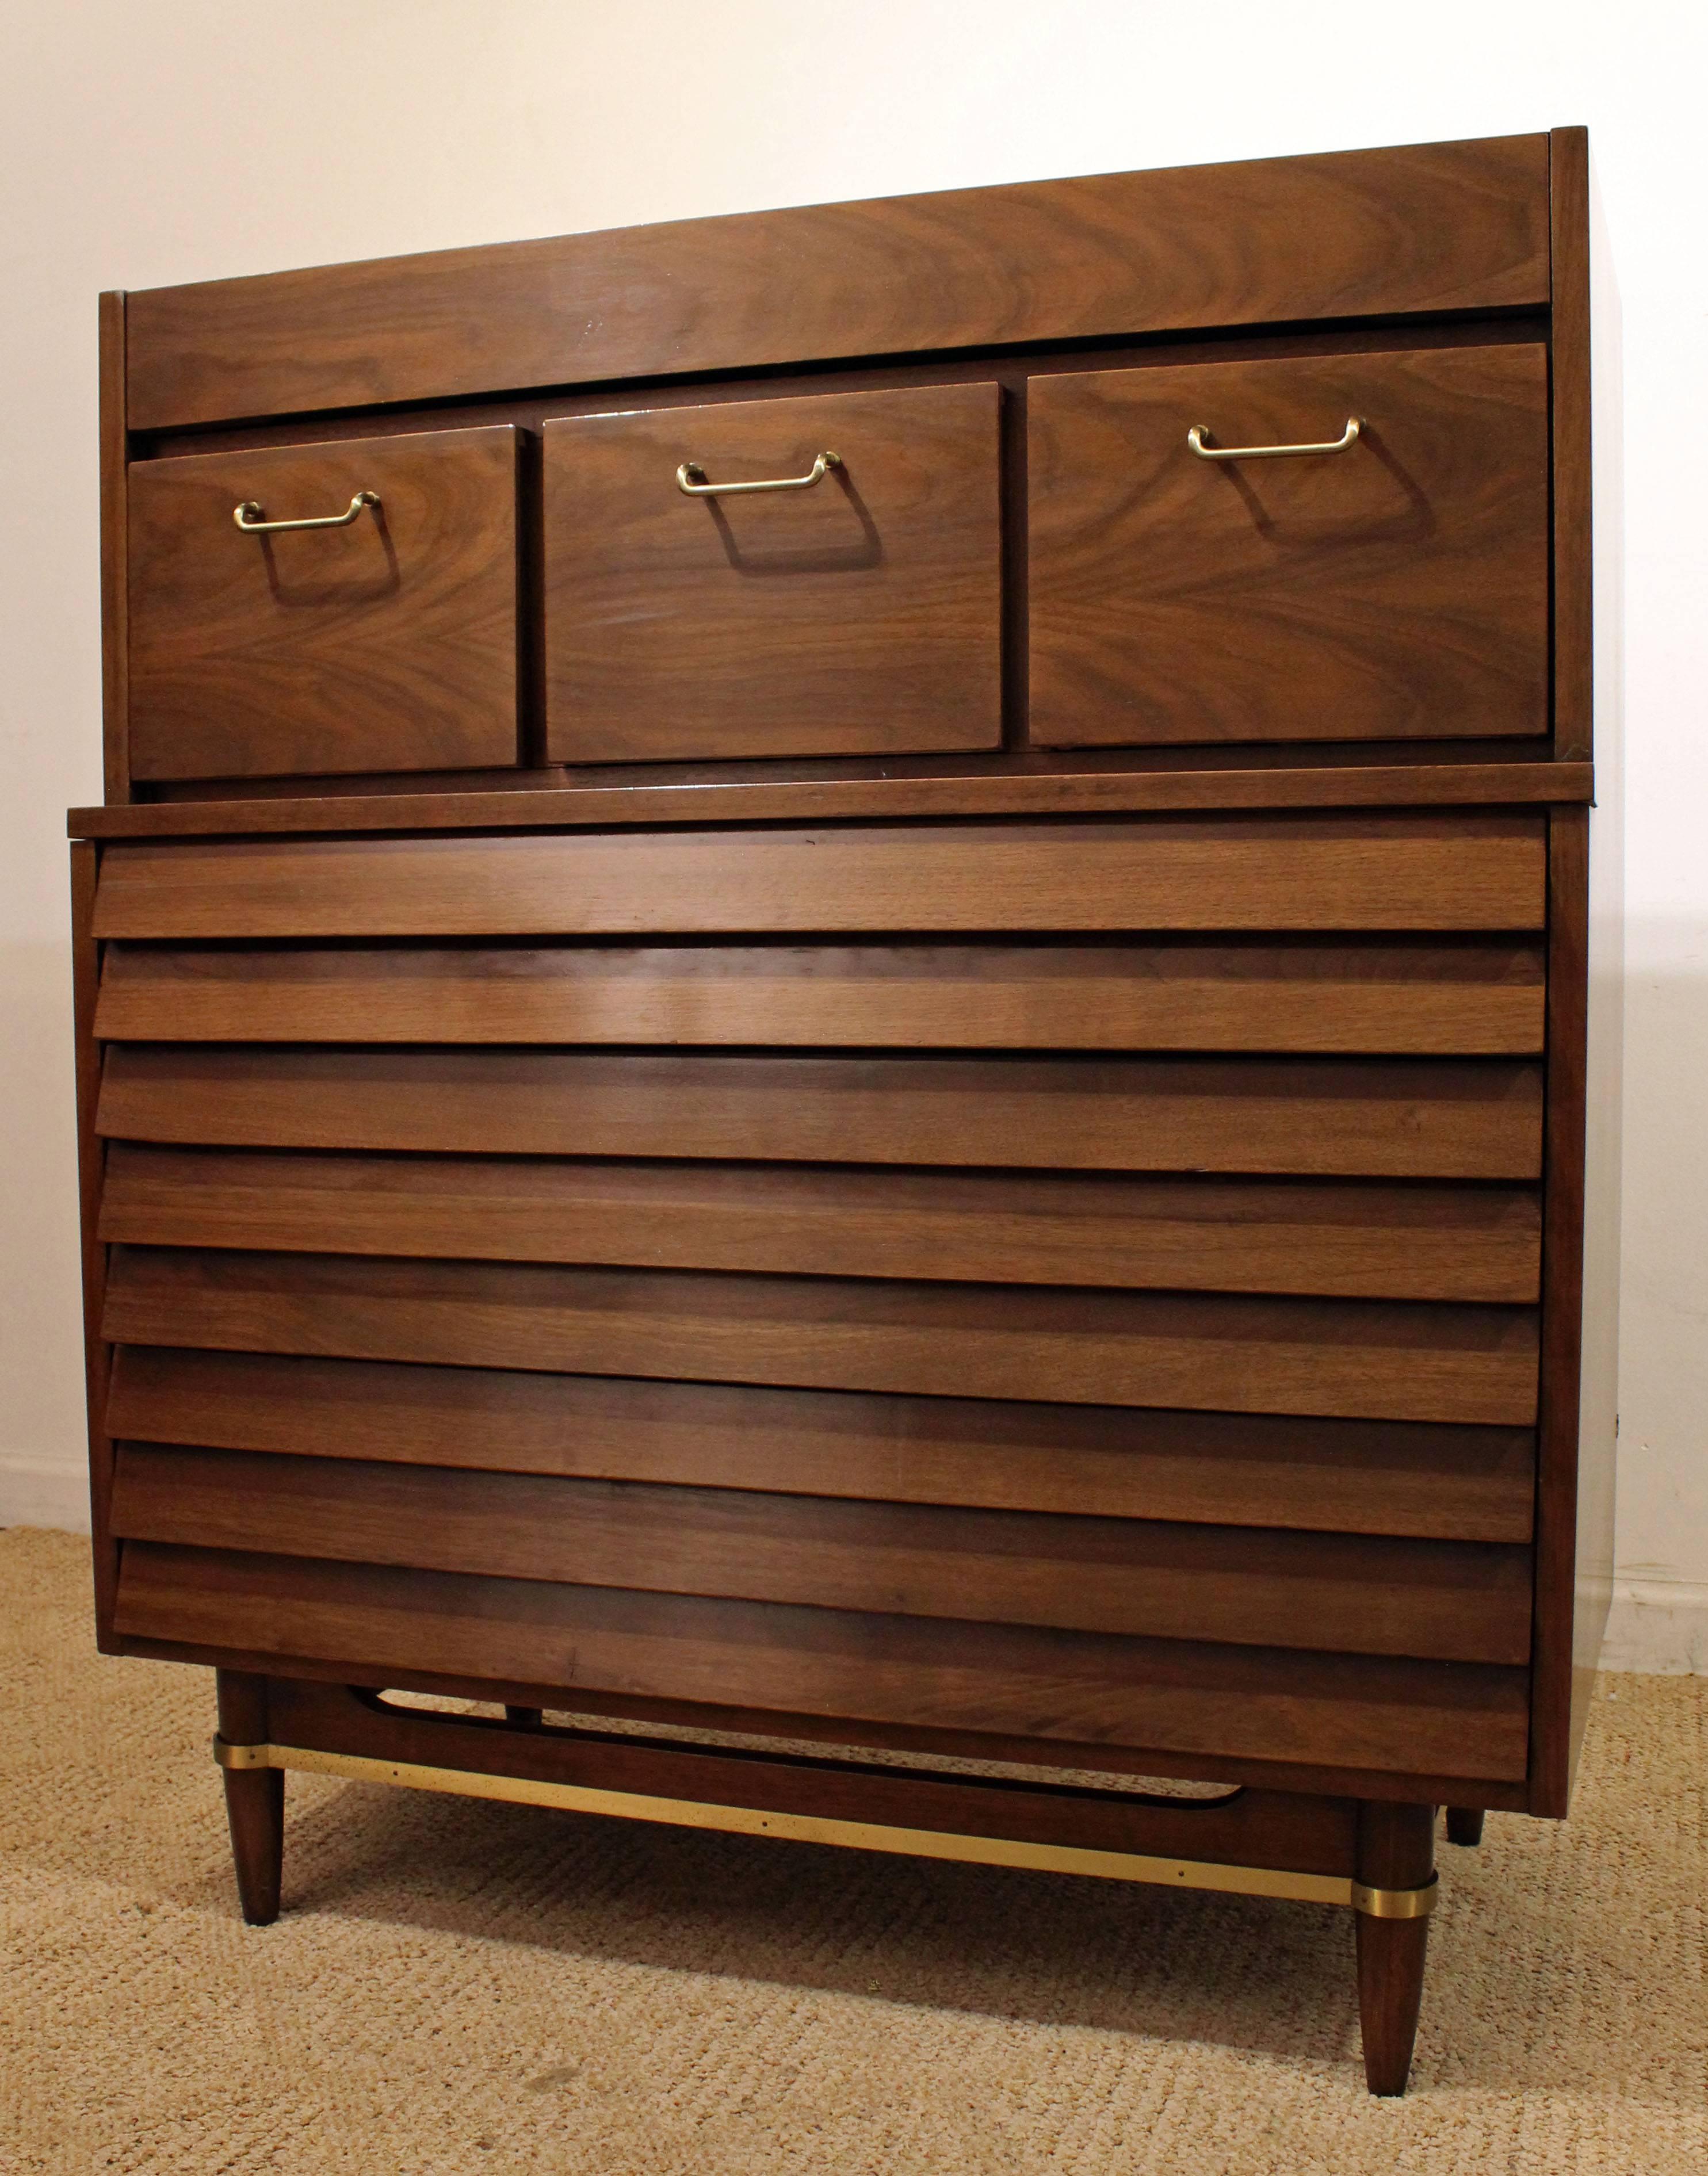 Offered is a Mid-Century Modern tall chest, designed by Merton L. Gershun for American of Martinsville's 